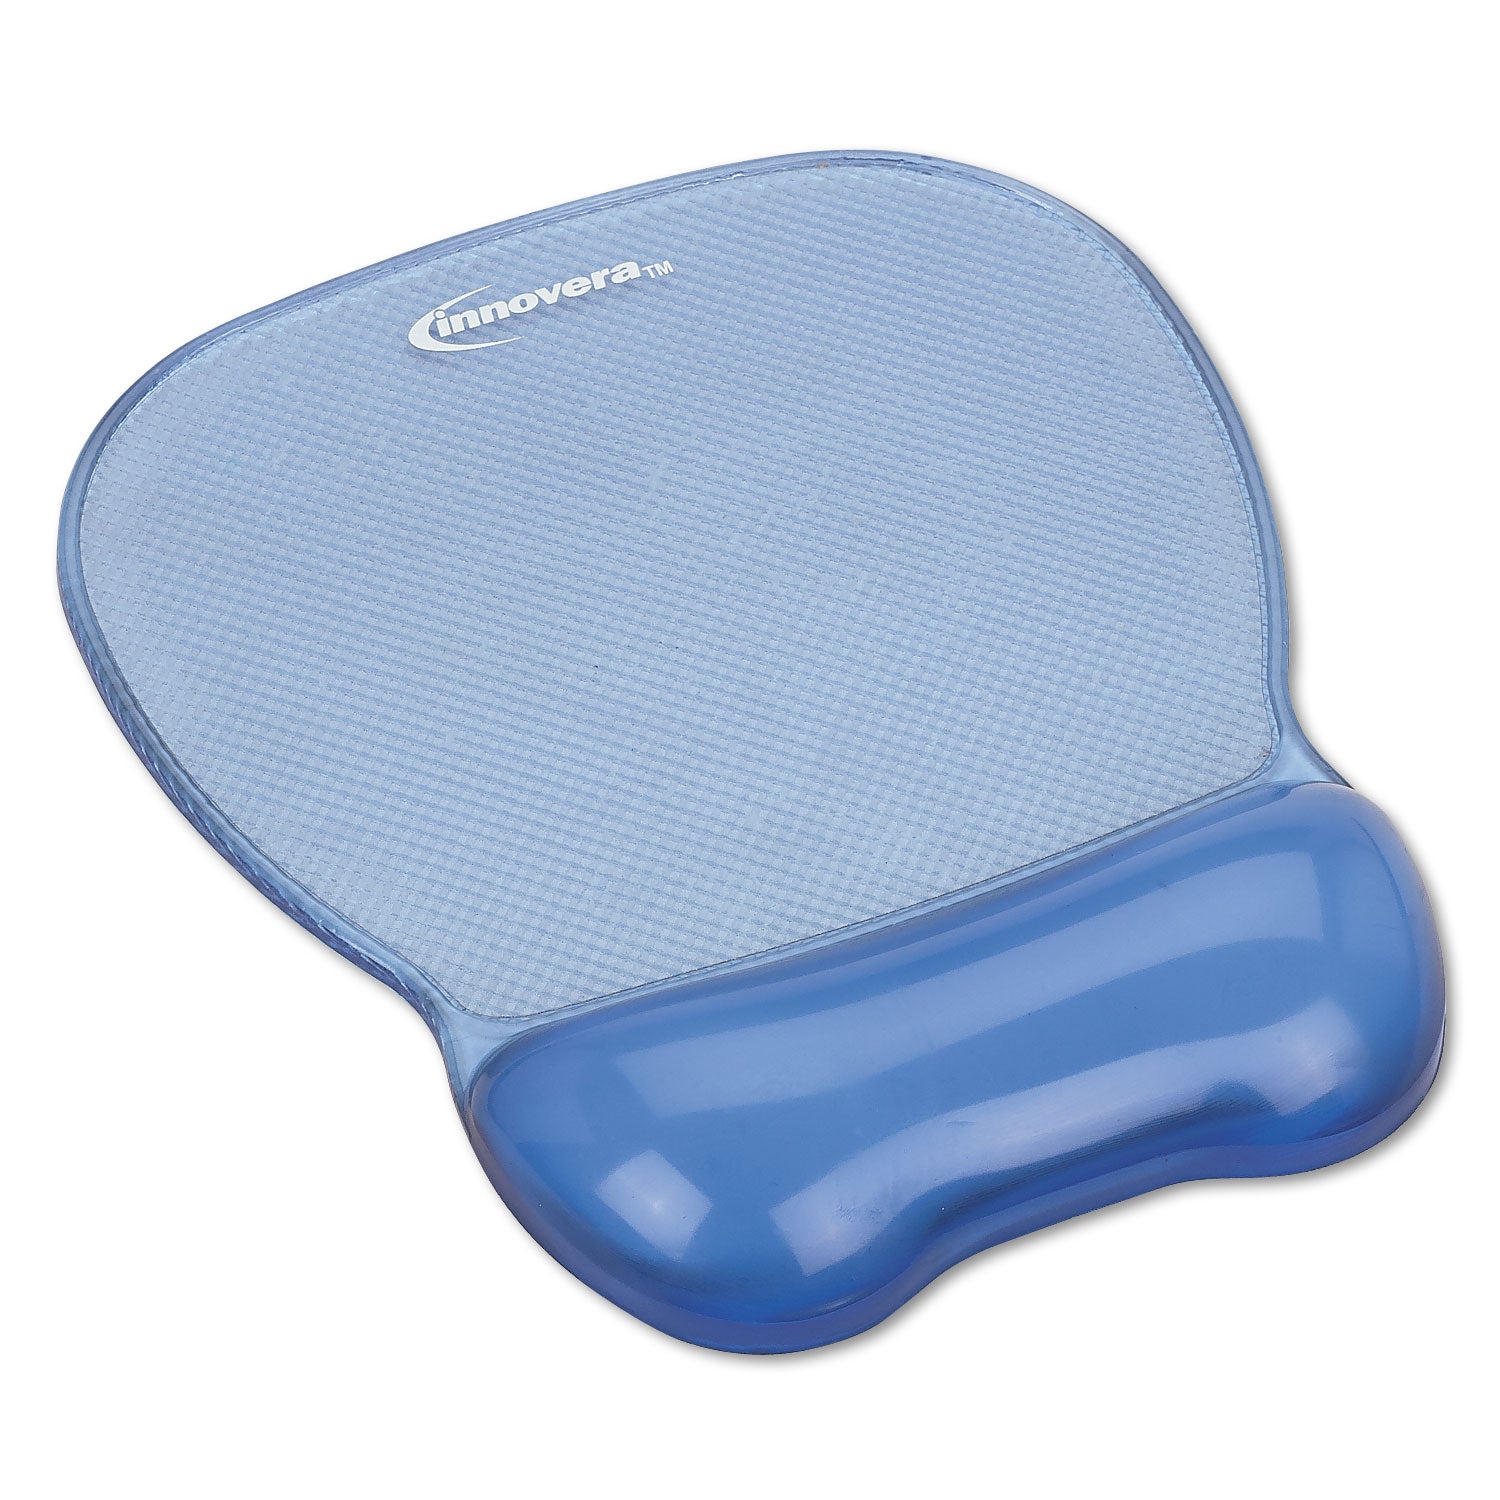 Mouse Pad with Gel Wrist Rest, 8.25 x 9.62, Blue - 